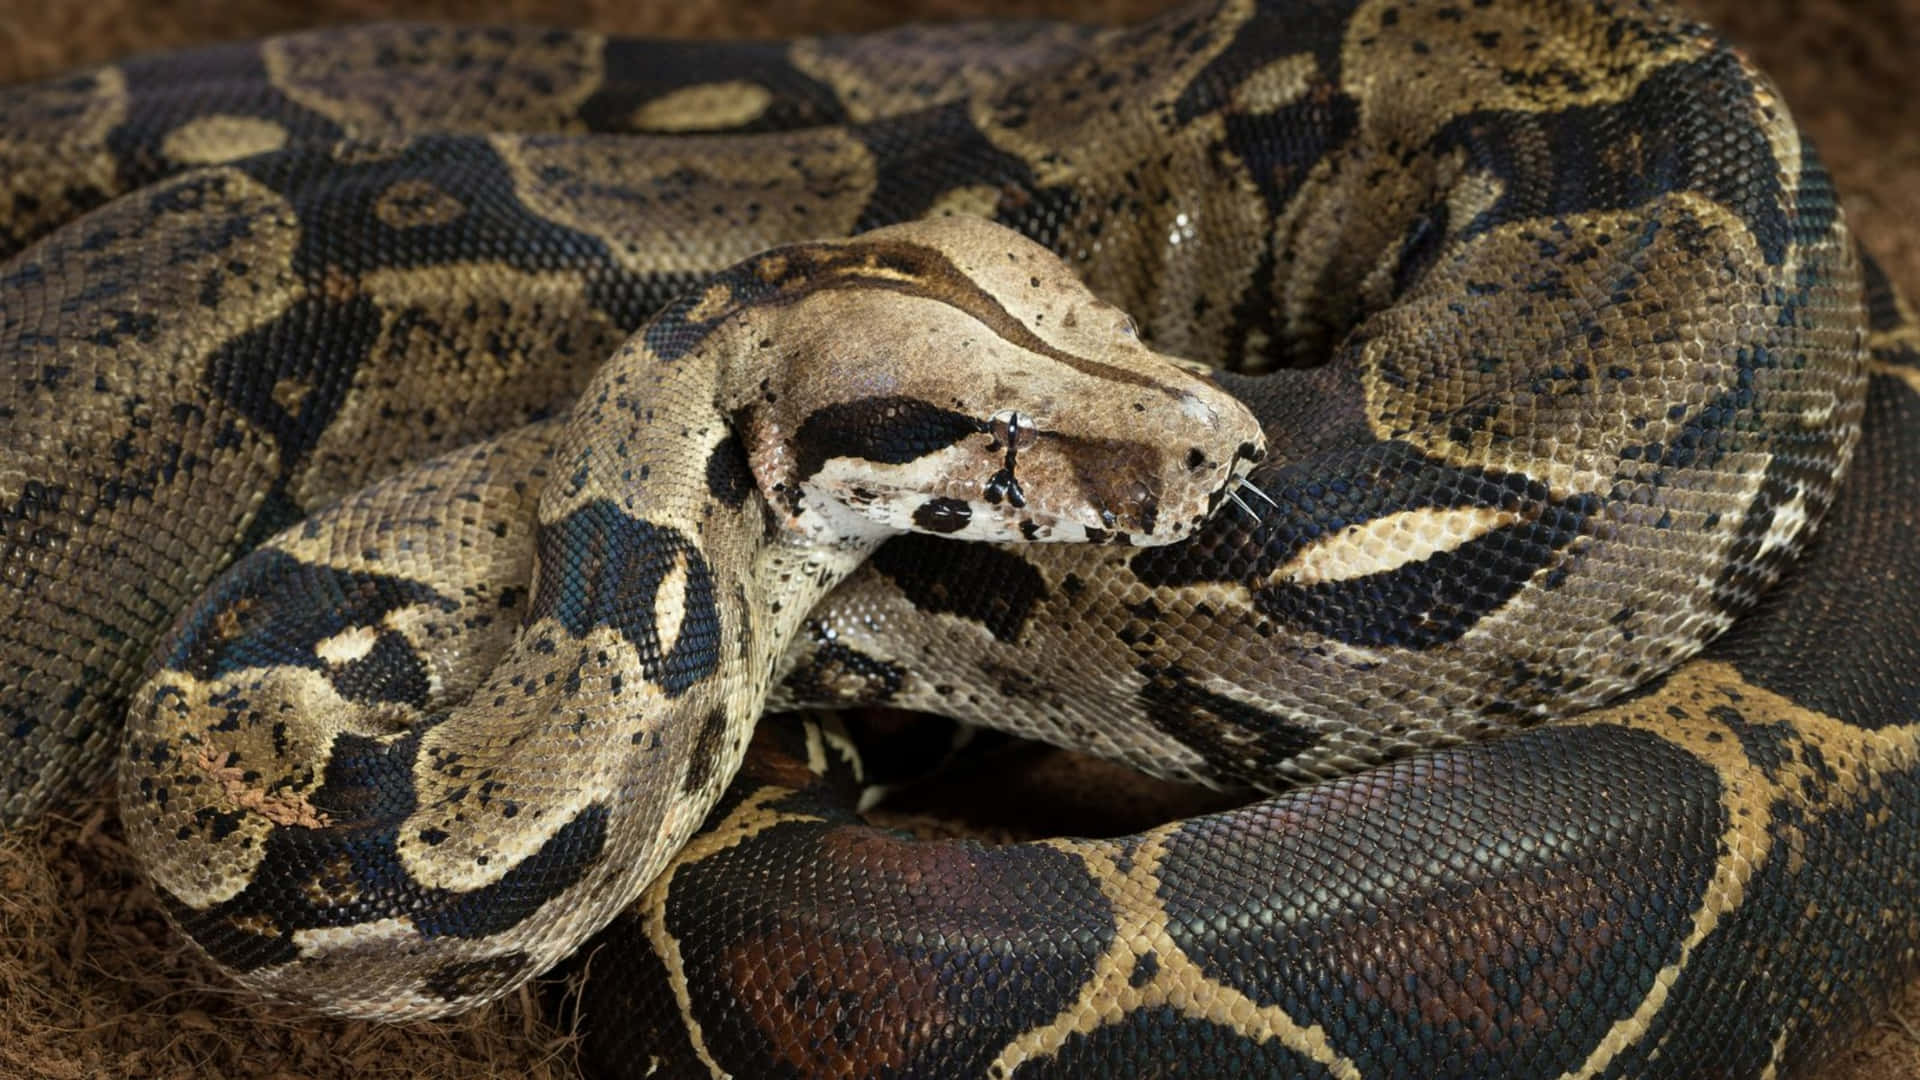 Boa Constrictor Camouflage Wallpaper